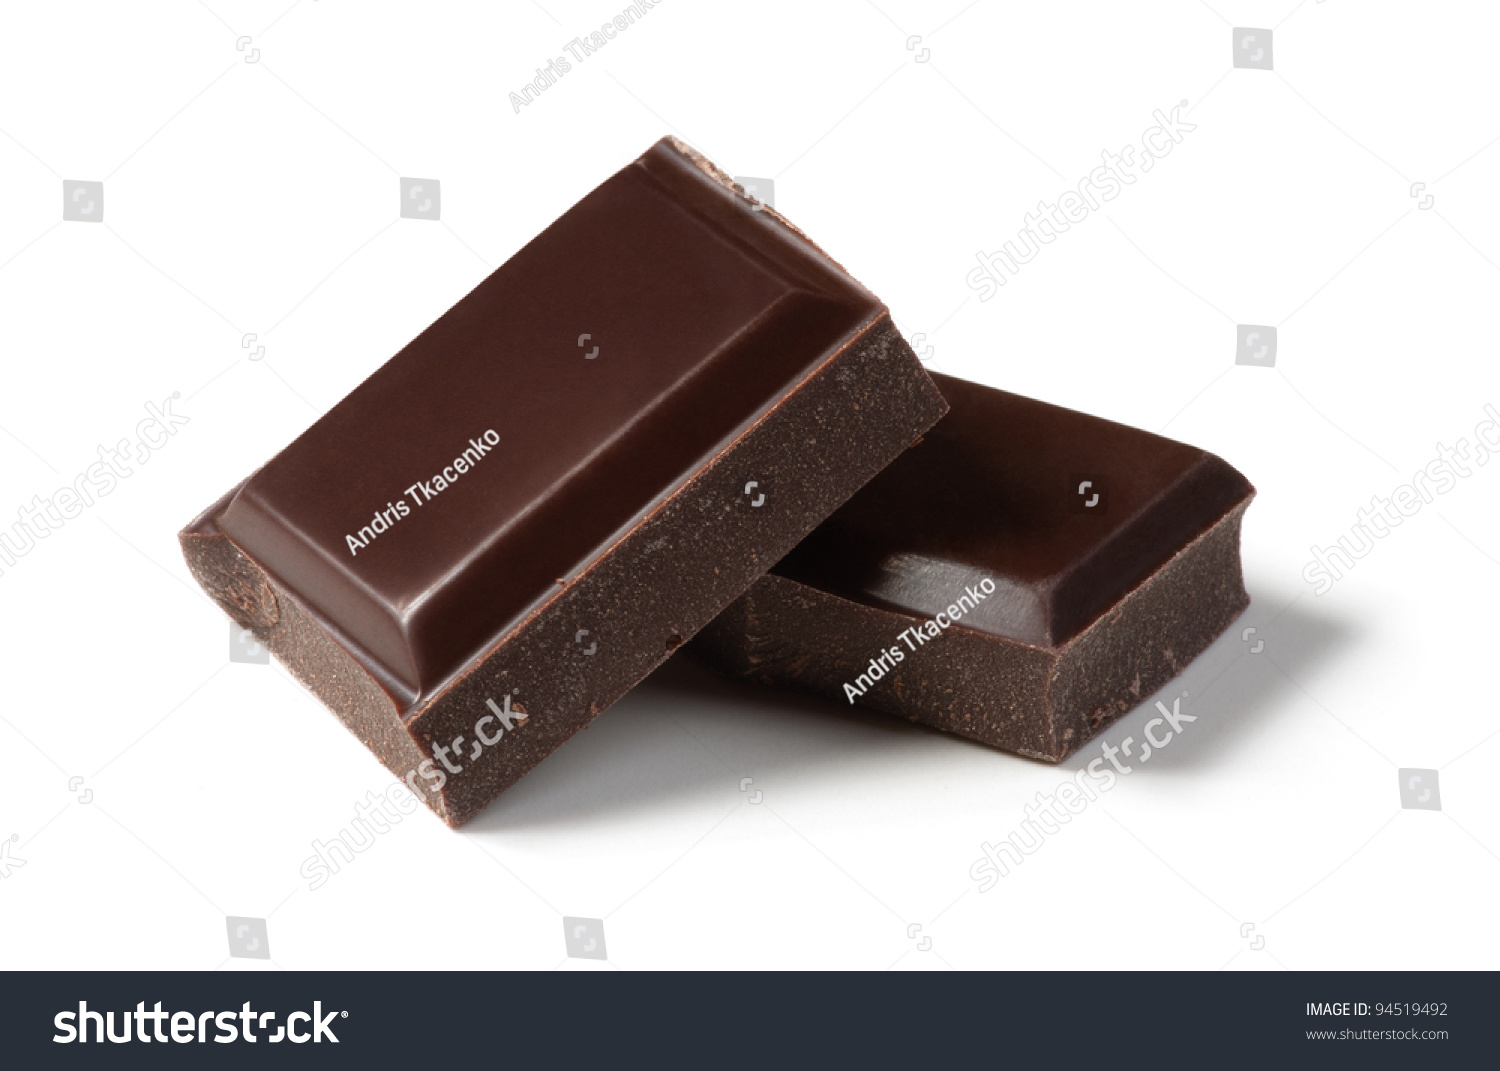 Two pieces of chocolate isolated on white background. Cleaned and retouched photo. #94519492